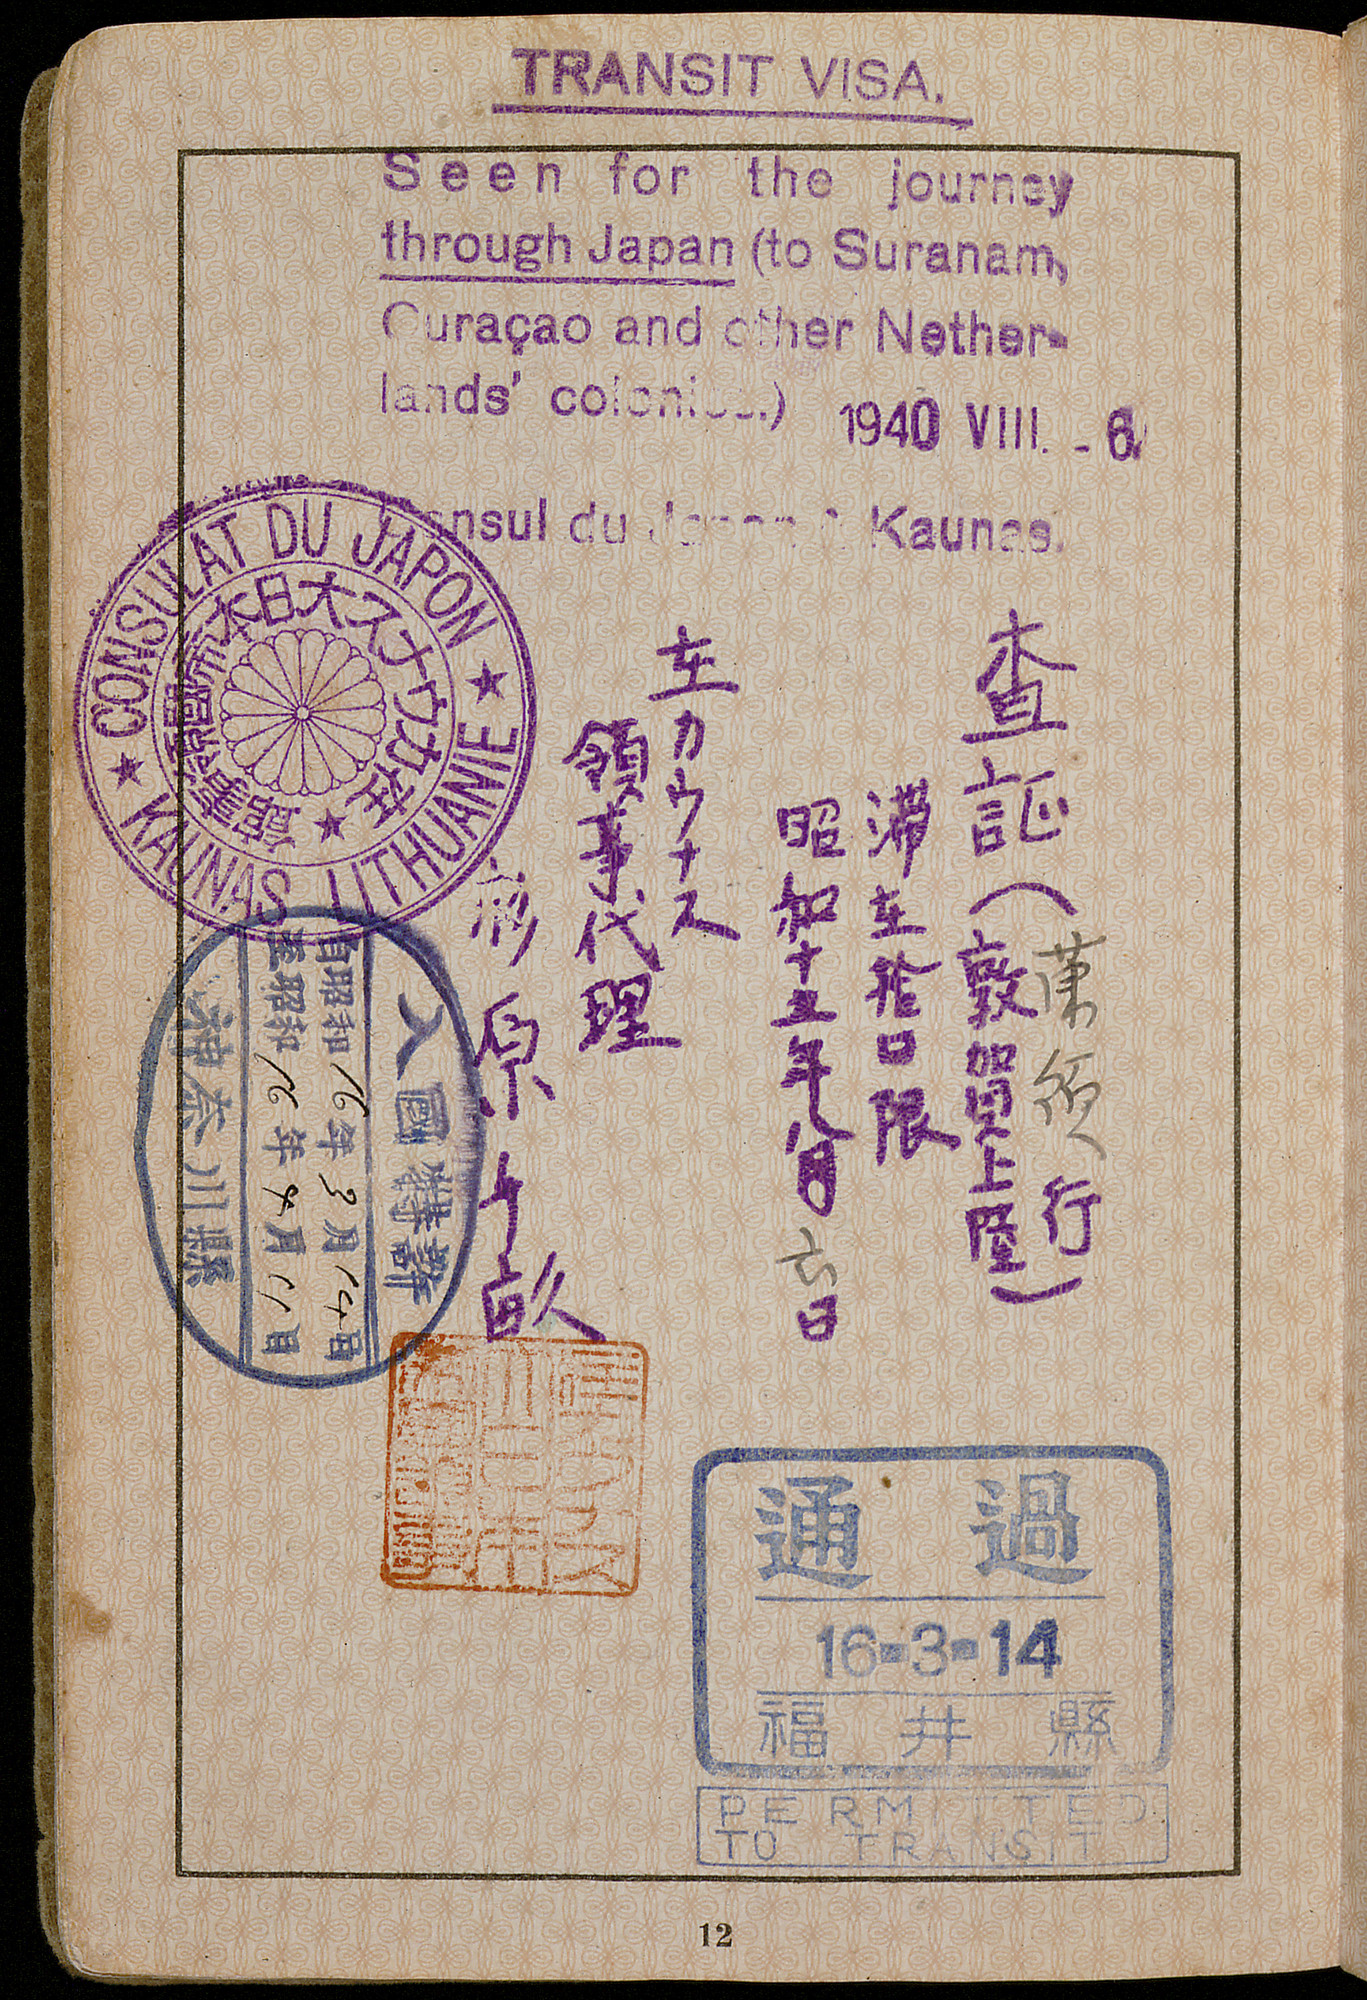 Passport issued to Setty Sondheimer with visas to Caracao and Japan.